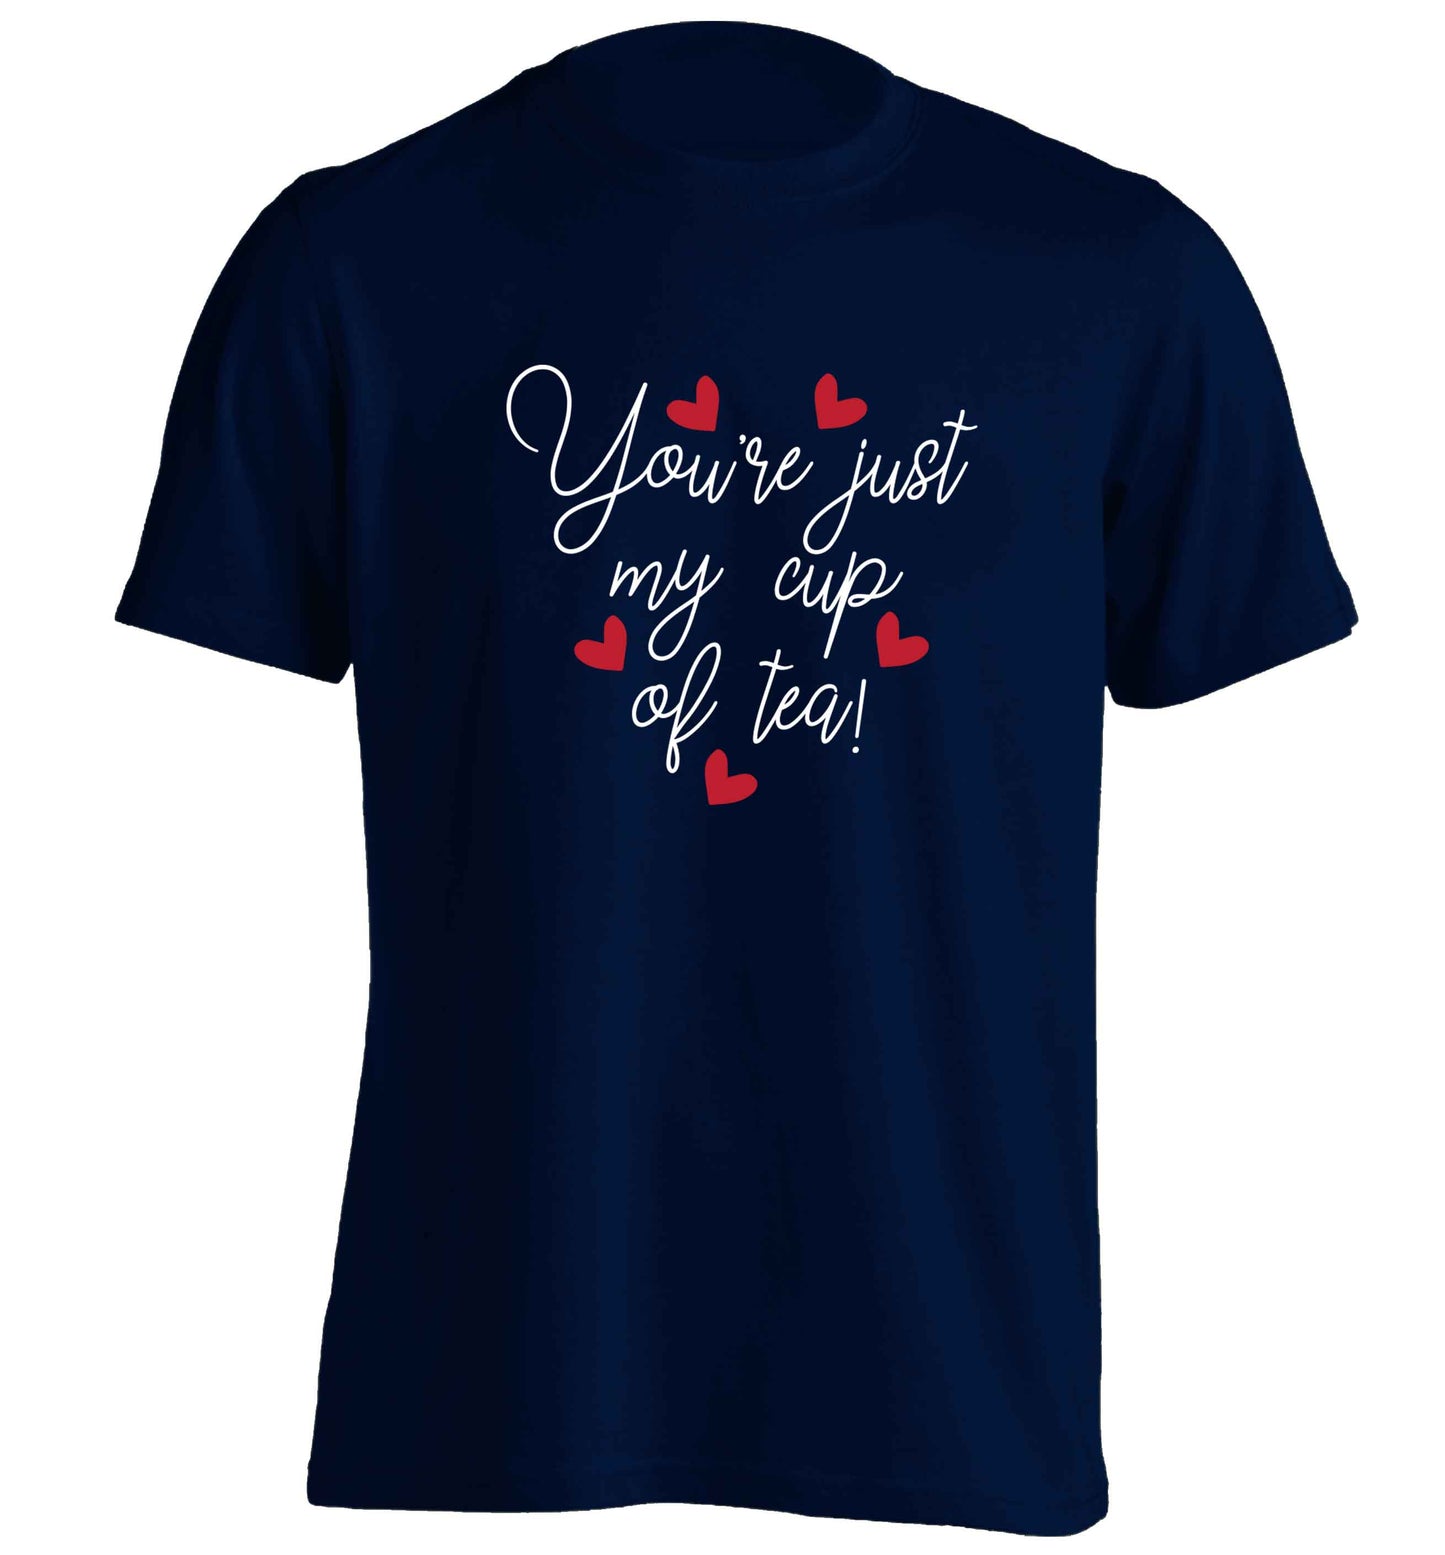 You're just my cup of tea adults unisex navy Tshirt 2XL